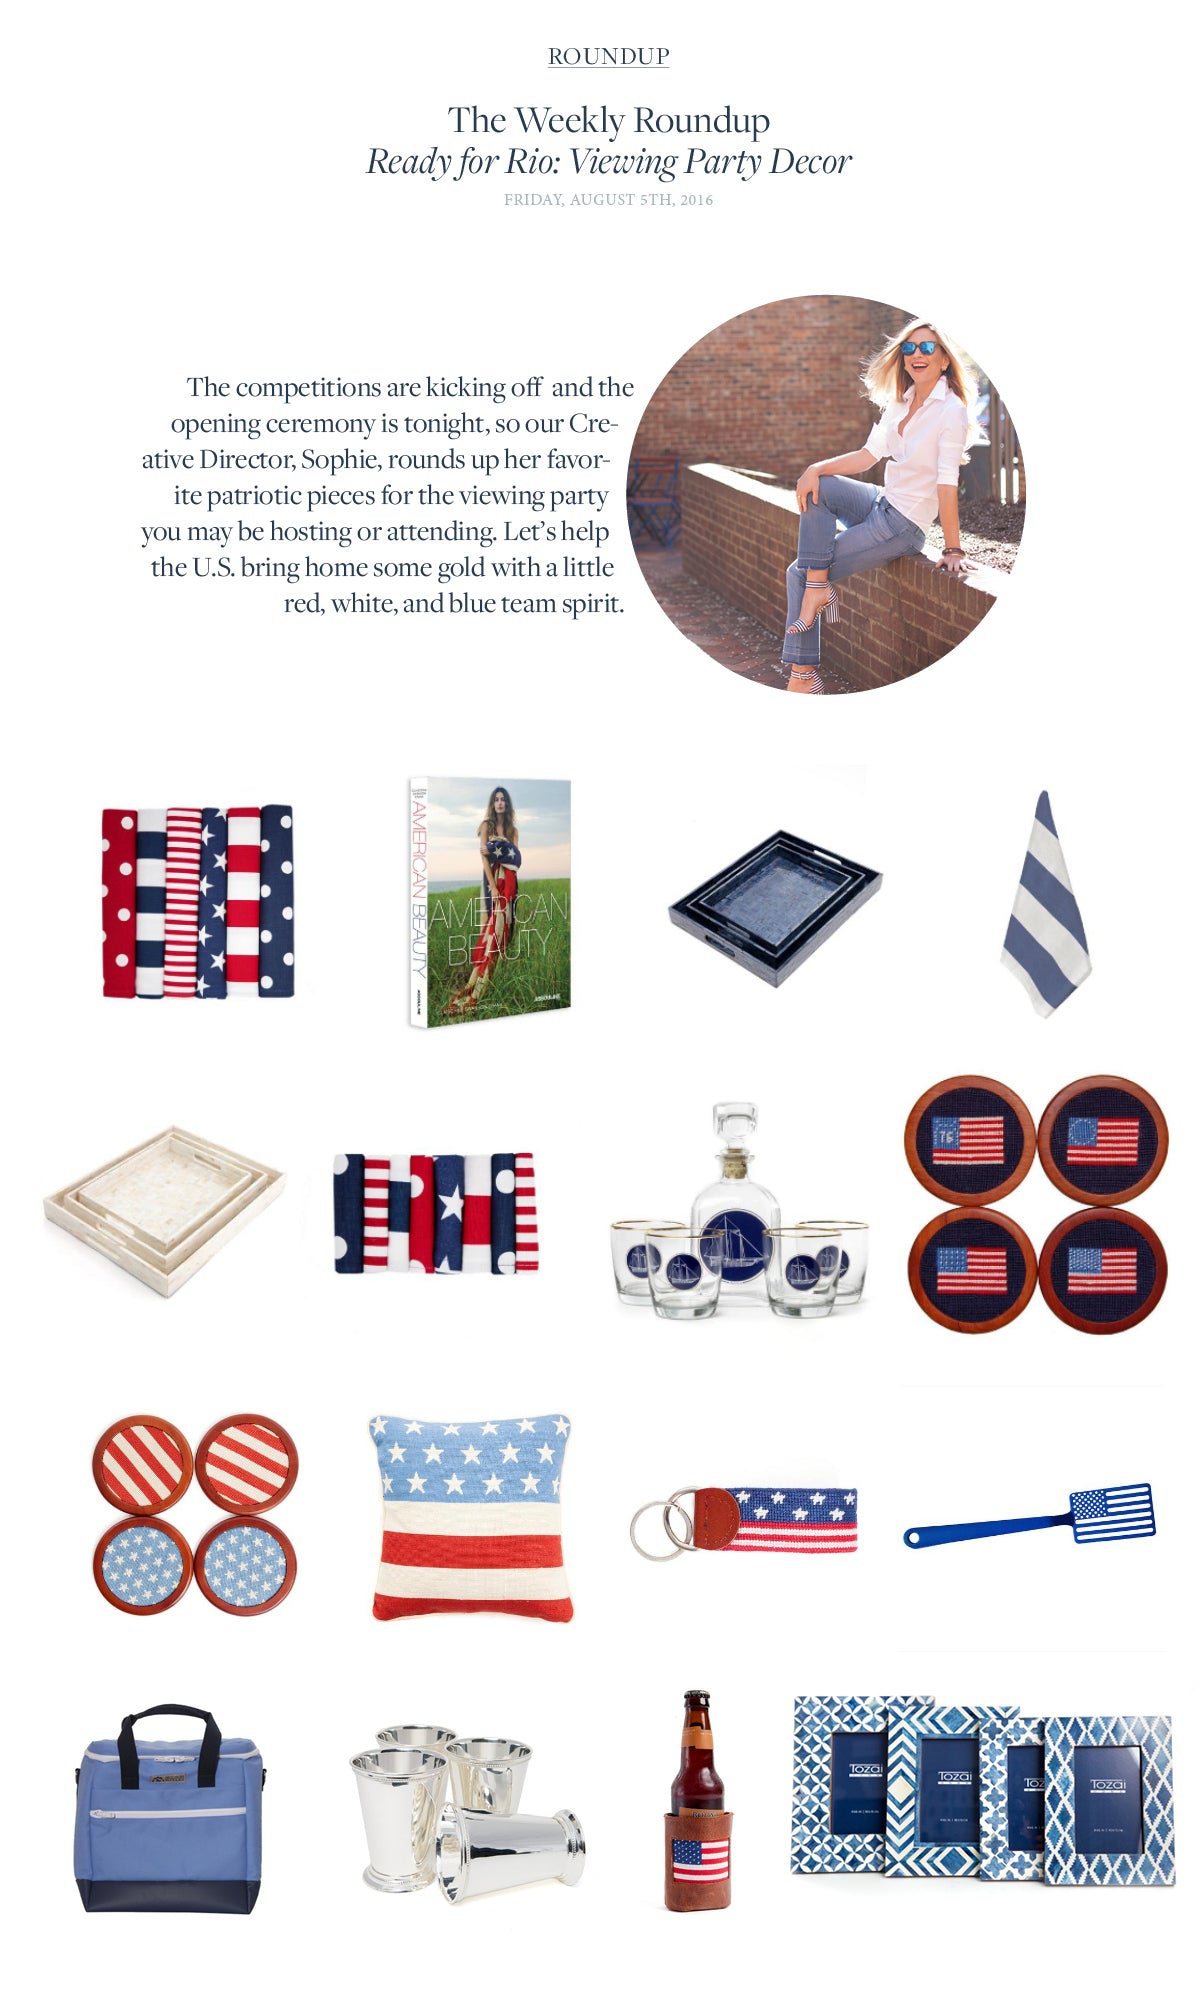 The competitions are kicking off  and the opening ceremony is tonight, so our Creative Director, Sophie, rounds up her favorite patriotic pieces for the viewing party you may be hosting or attending. Let’s help the U.S. bring home some gold with a little red, white, and blue team spirit. 